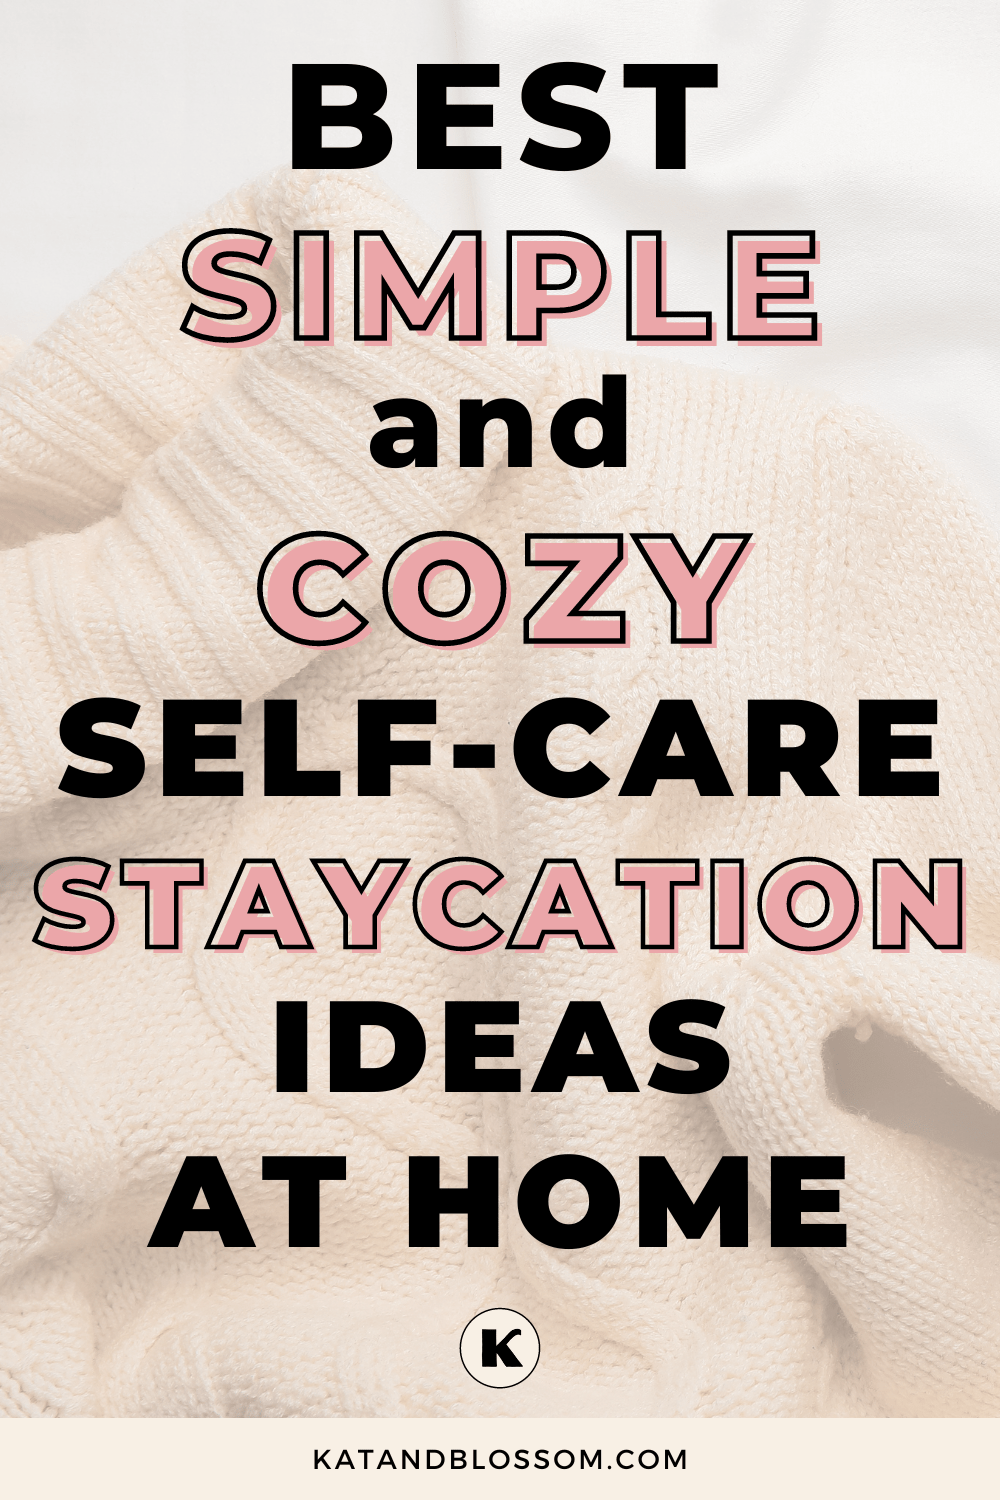 The Best Simple Cozy Self Care Staycation Ideas at Home Pinterest Cover (1)